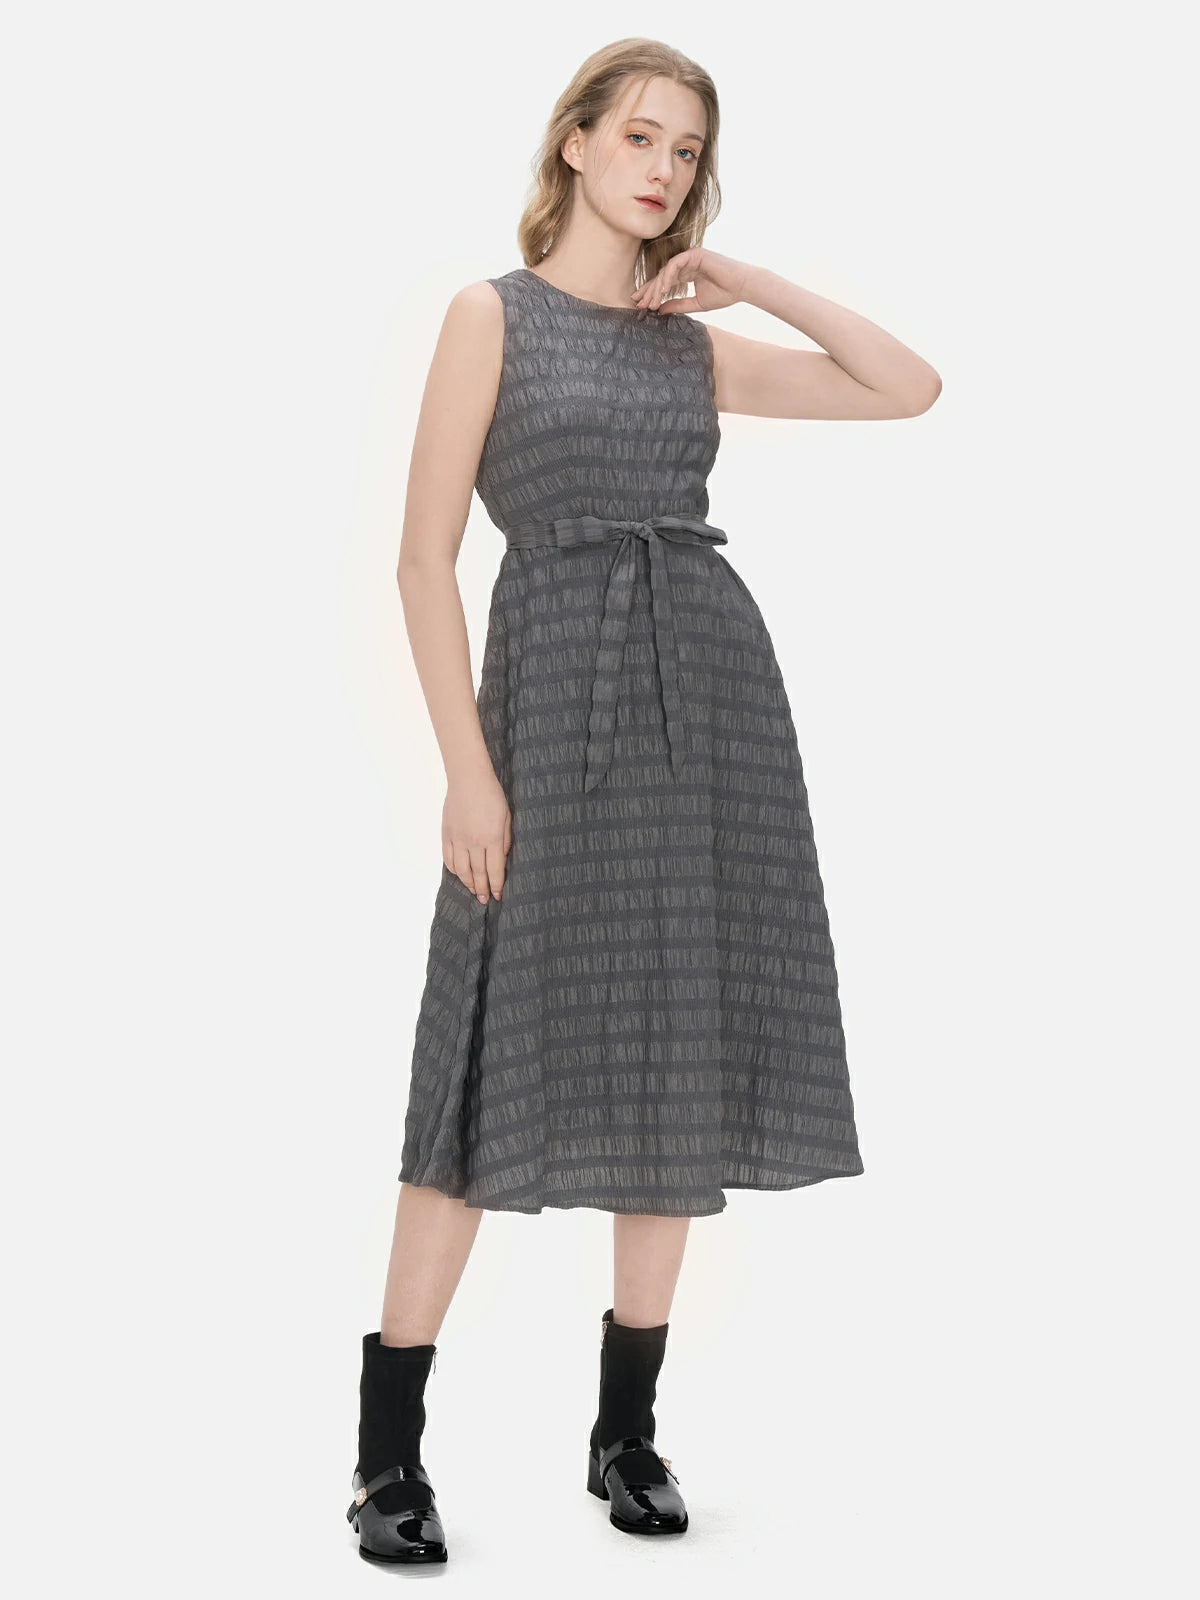 Showcase your individuality with this avant-garde ensemble, combining an irregular buttoned cardigan and a sleeveless A-line dress with a textured stripe design.